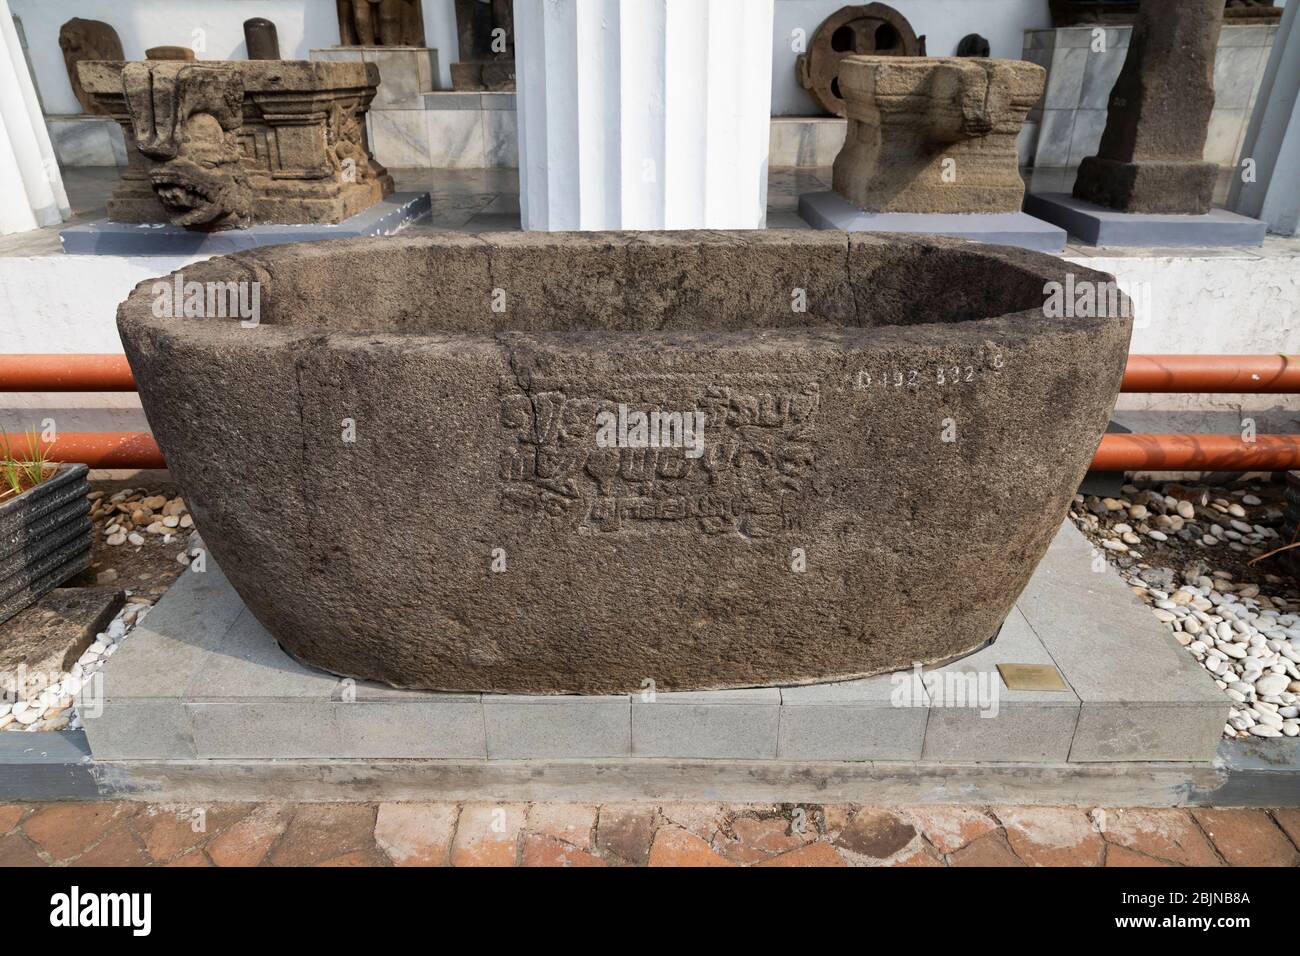 Jakarta, Indonesia - July 14, 2019: Ancient deposit or stone vase of enormous dimensions and inscriptions, National Museum of Indonesia. Stock Photo